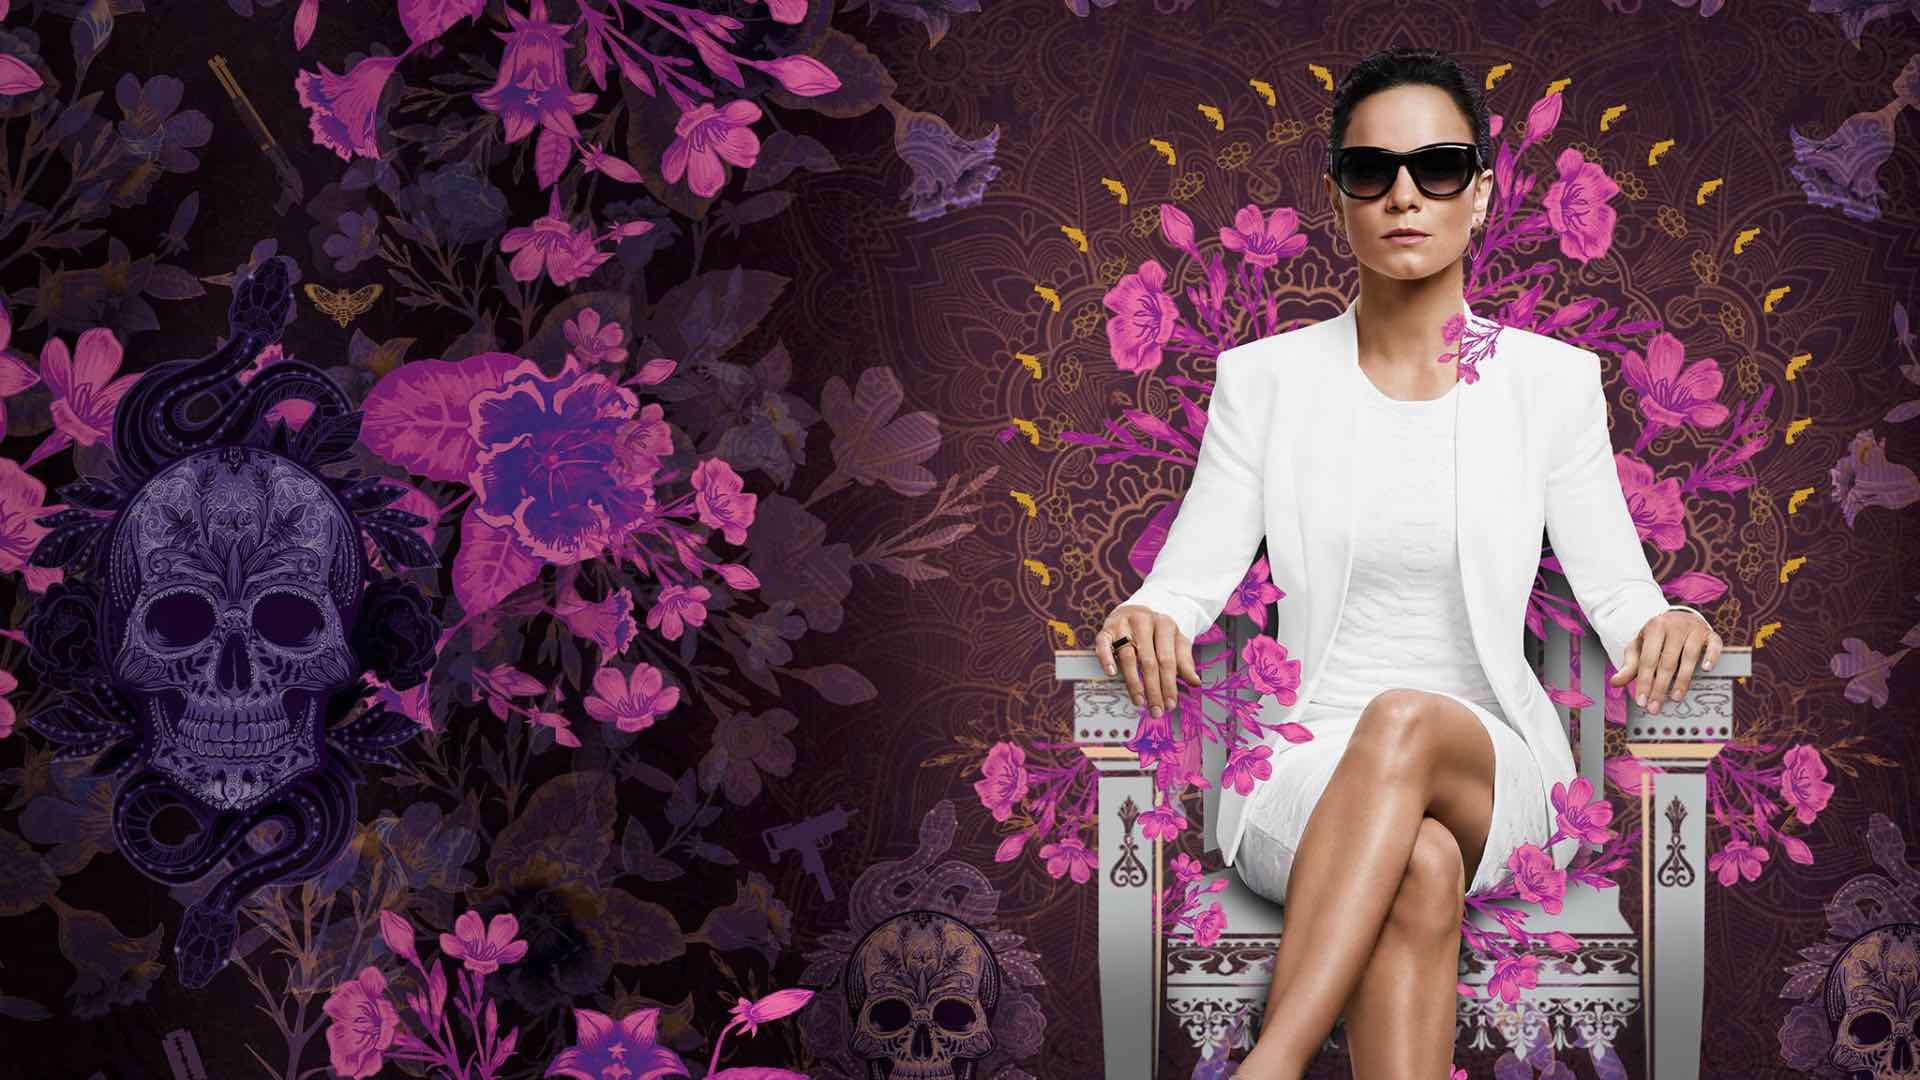 We look back at the past three seasons of 'Queen of the South' and judged whether Teresa’s friends (and a few enemies) have a good chance of reappearing.